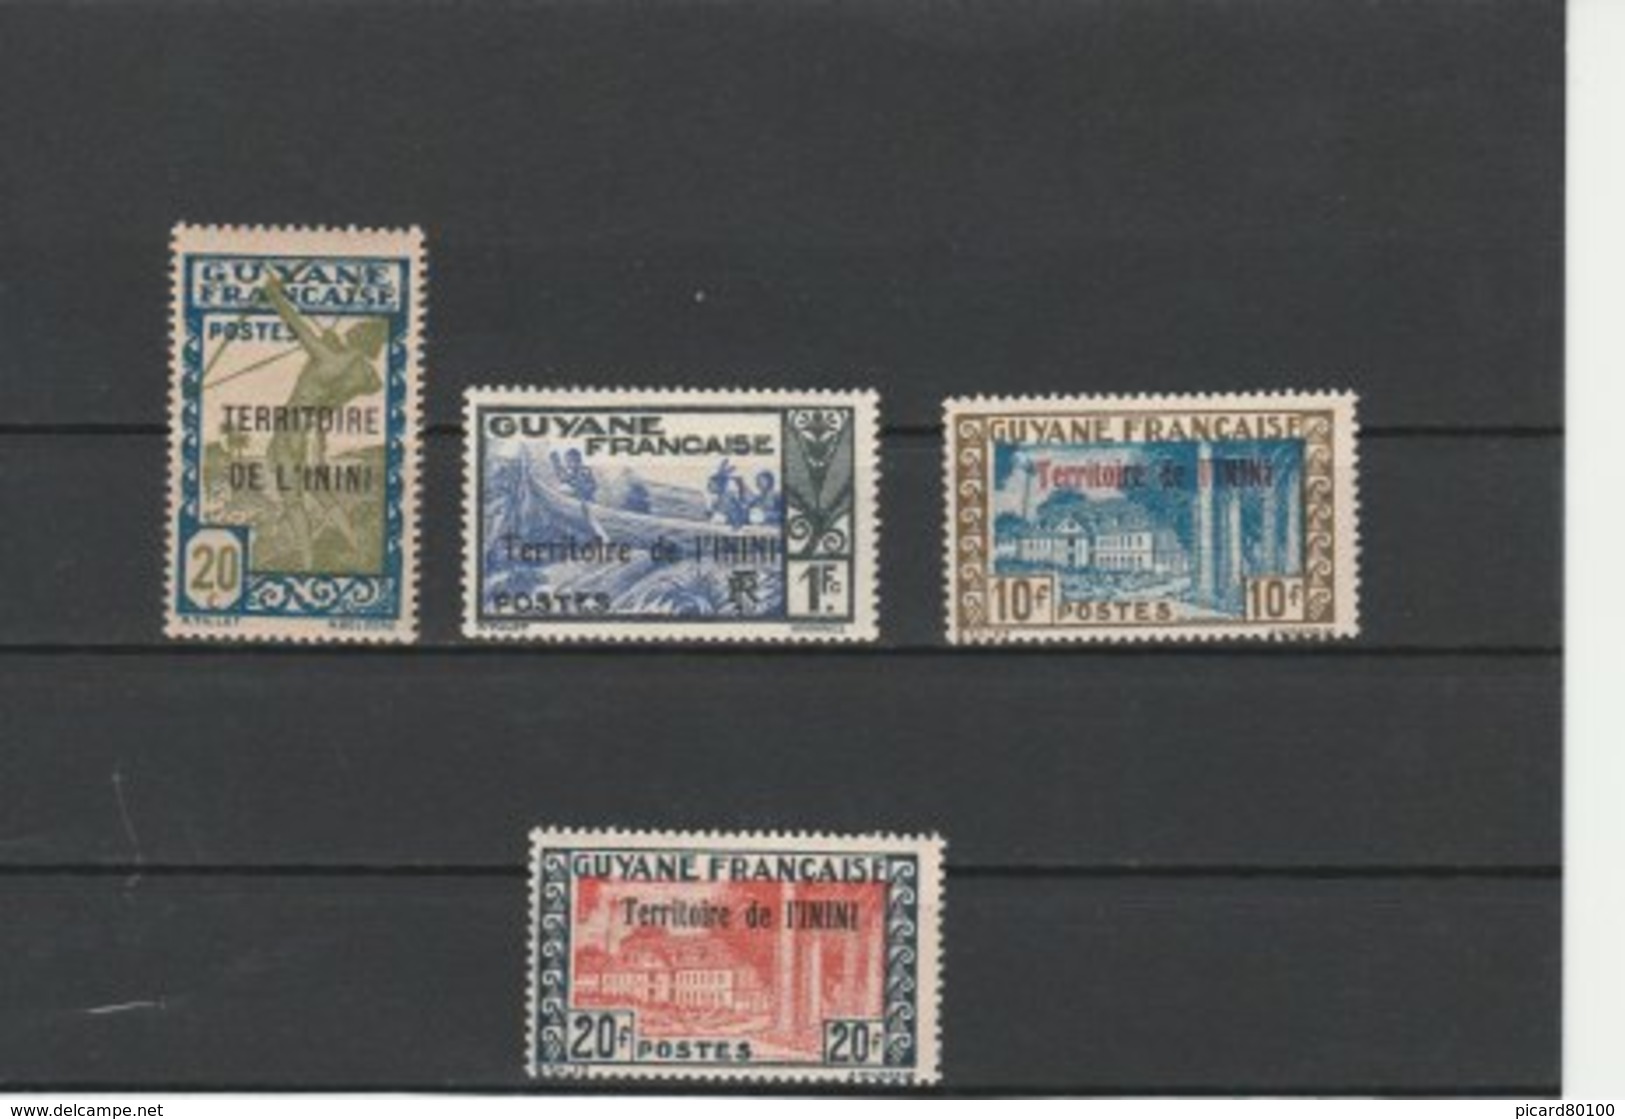 ININI TIMBRES**LUXE SERIE COMPLETE N° 53/56 COTE 8.60 EUROS - Neufs